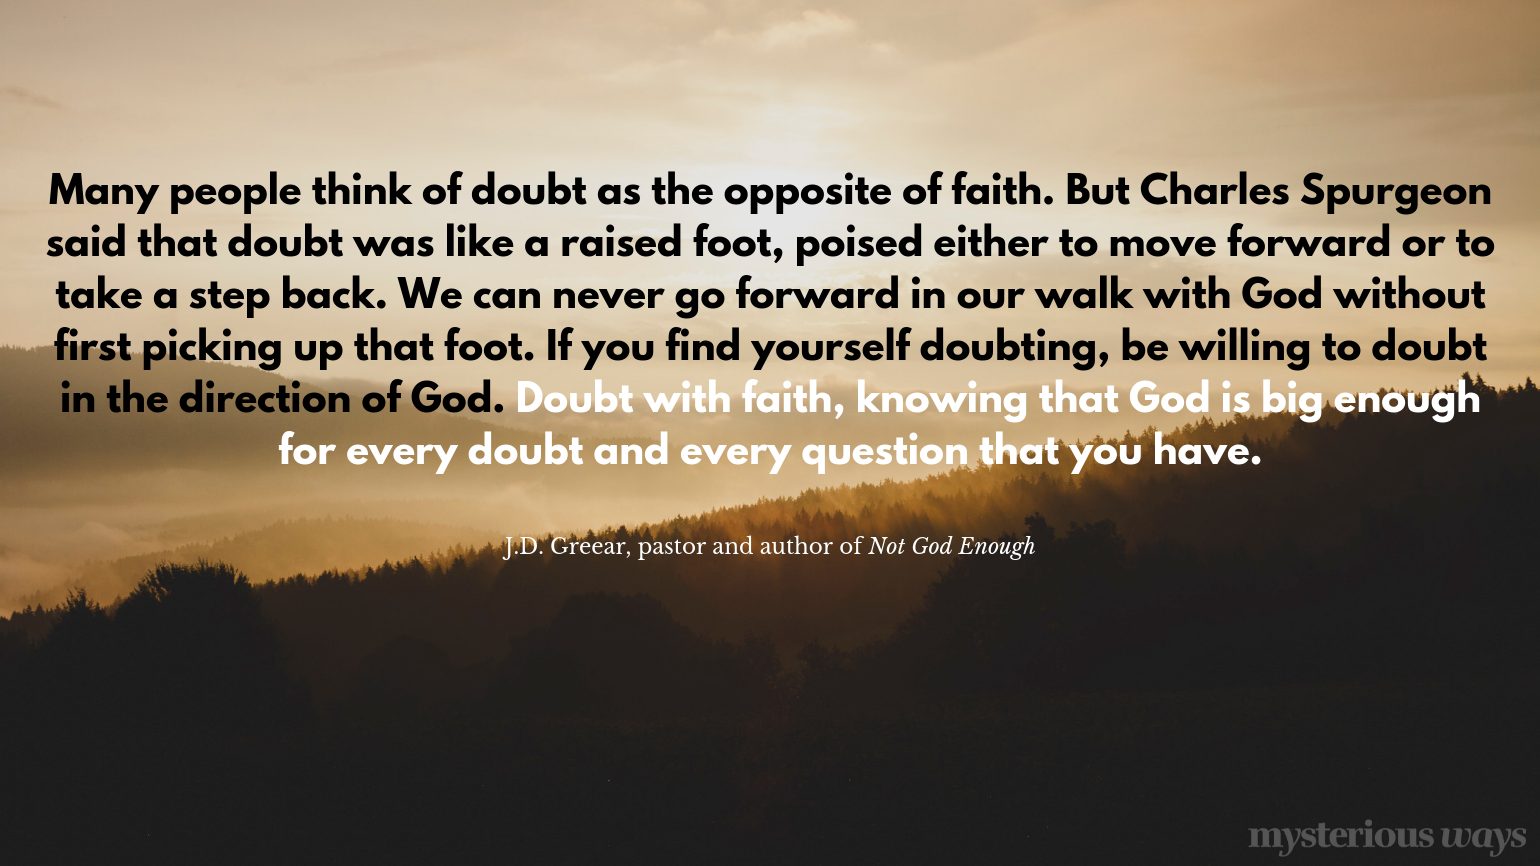 “Many people think of doubt as the opposite of faith.But Charles Spurgeon said that doubt was like a raised foot, poised either to move forward or to take a step back. We can never go forward in our walk with God without first picking up that foot. If you find yourself doubting, be willing to doubt in the direction of God. Doubt with faith, knowing that God is big enough for every doubt and every question that you have.”